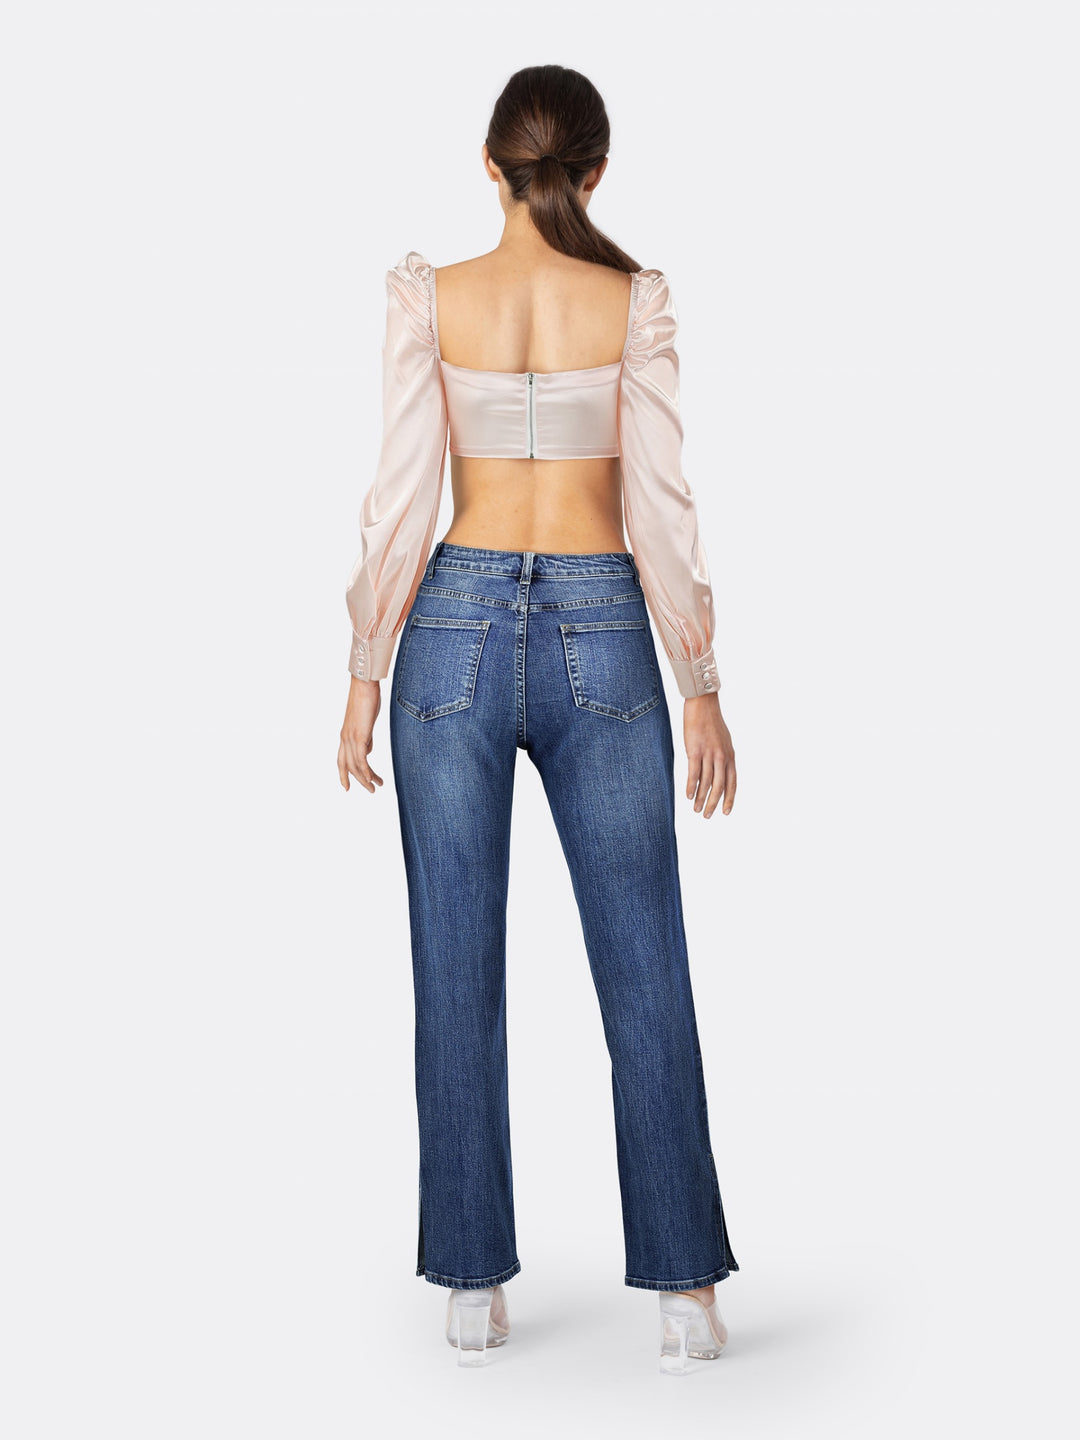 Satin Long Sleeve Crop Top with Buttons Details Pink Back